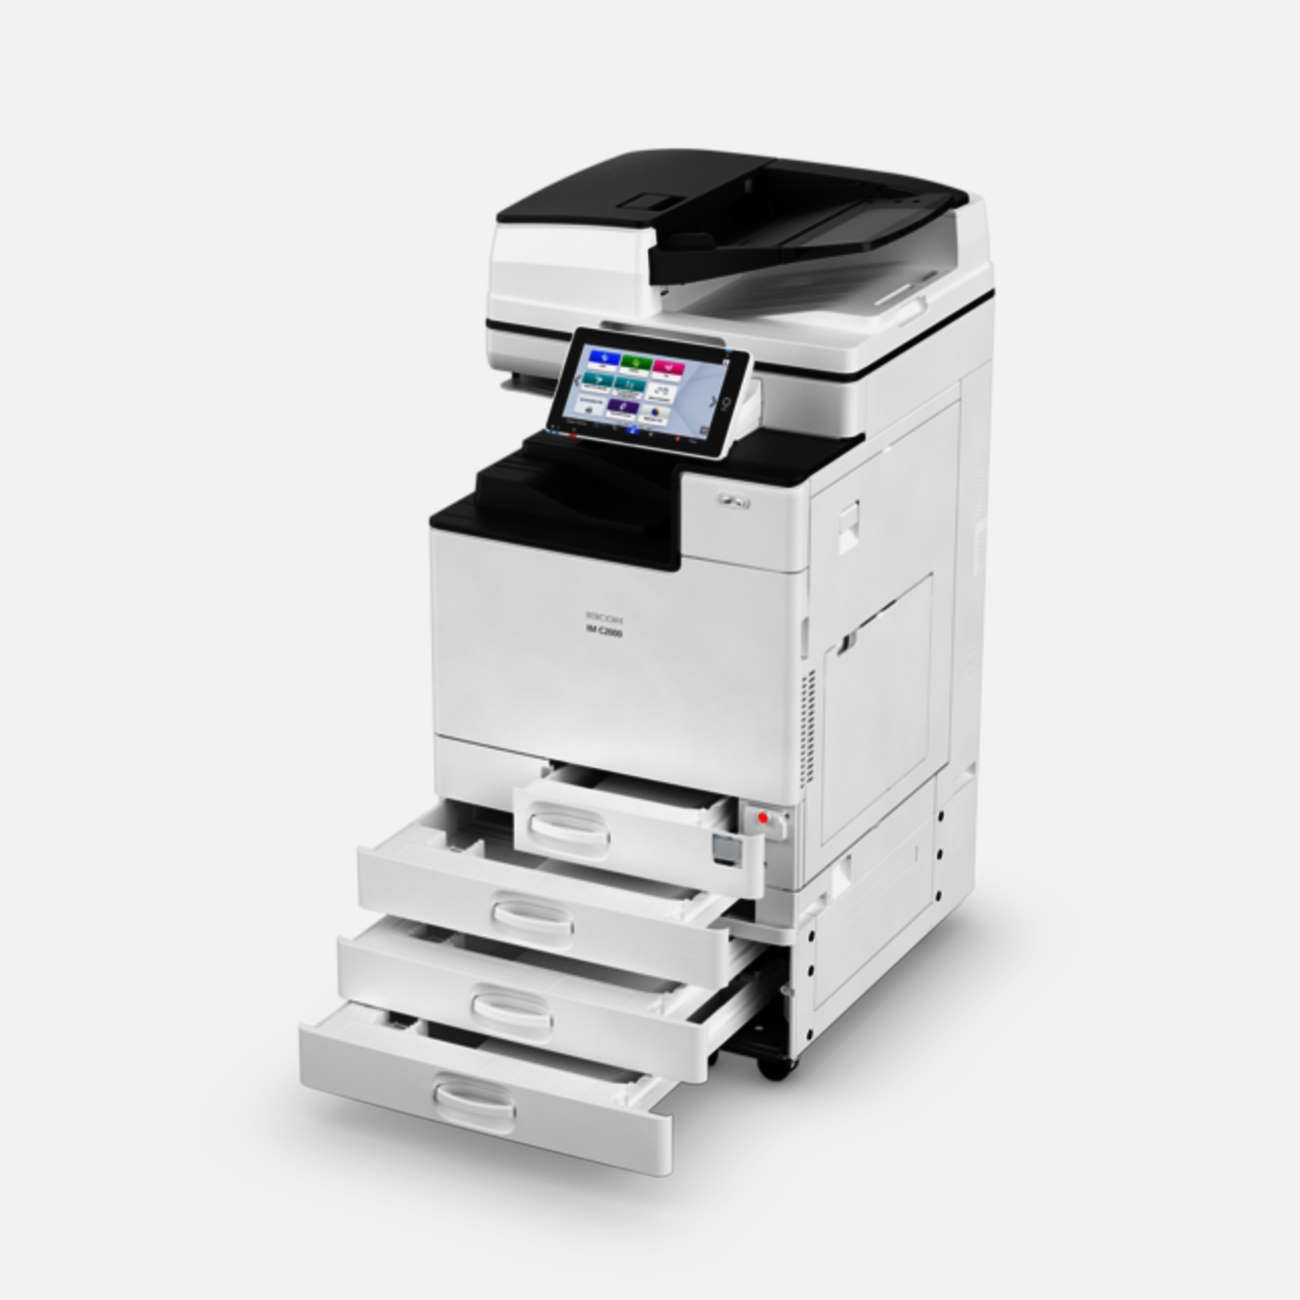 Photocopiers for Sale in Carlisle, Cumbria and The Borders